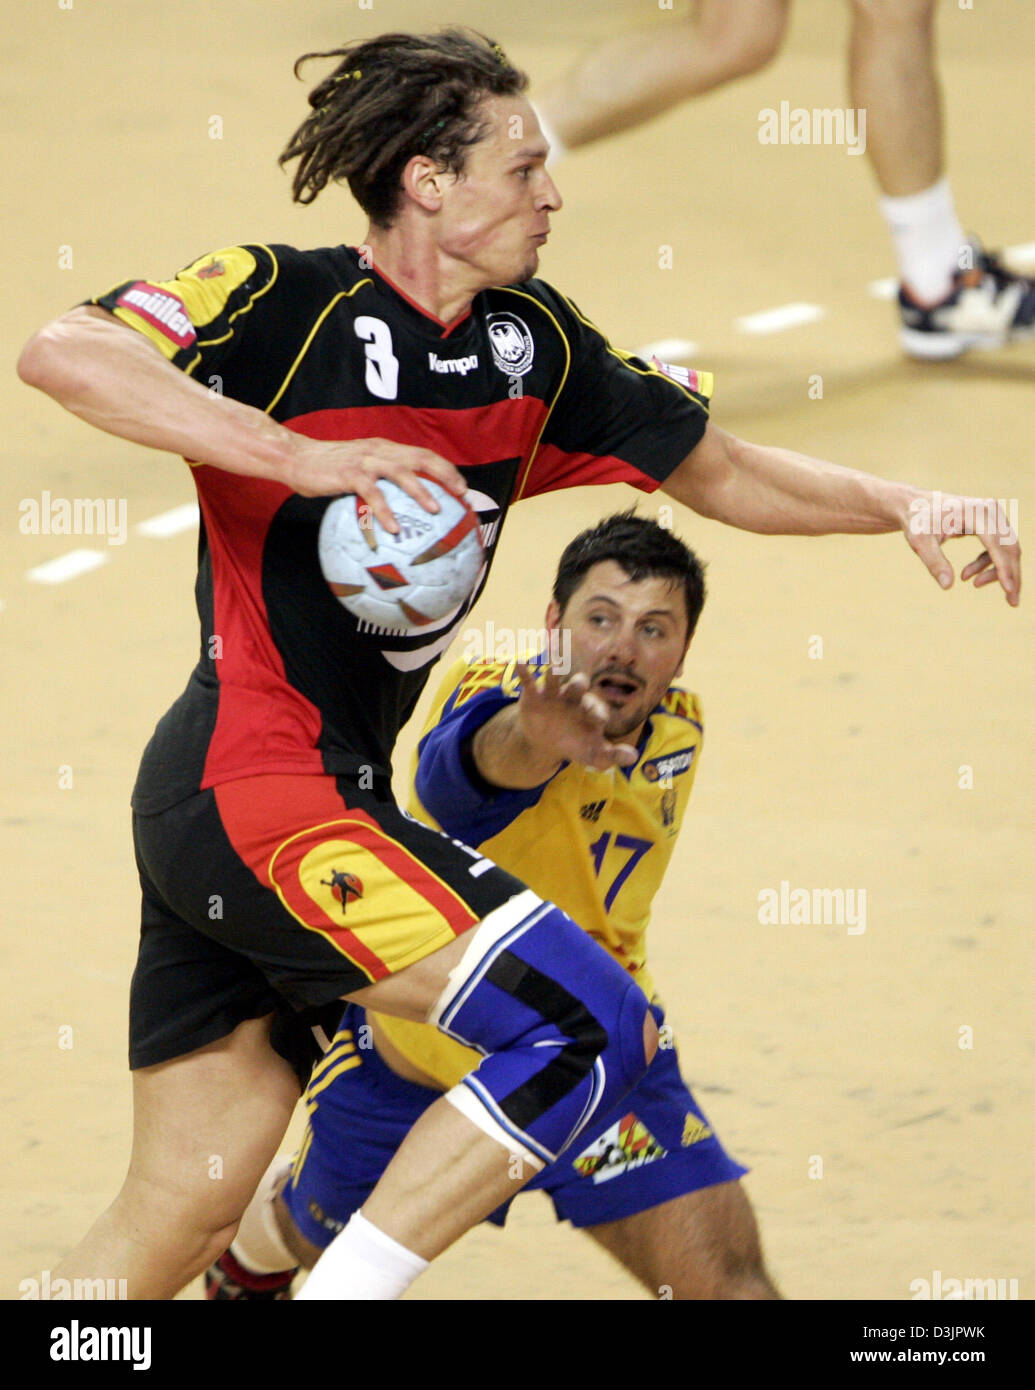 dpa) - German handball player Frank von Behren (front) jumps up to throw  the ball asserting himself against Swedish player Ljubomir Vranjes in the  final game of the main round between Sweden